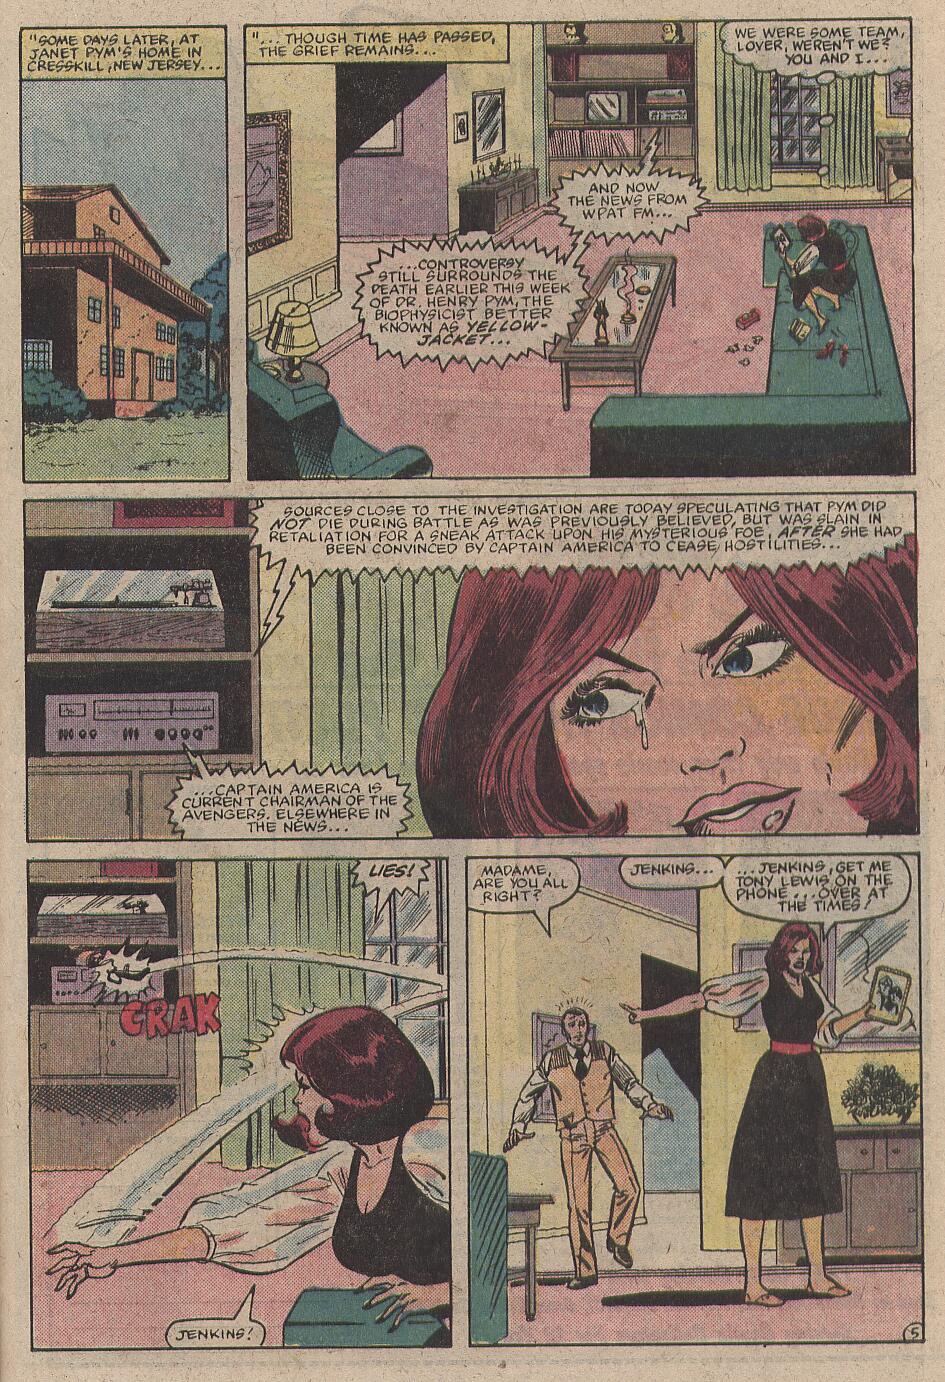 What If? (1977) issue 35 - Elektra had lived - Page 30